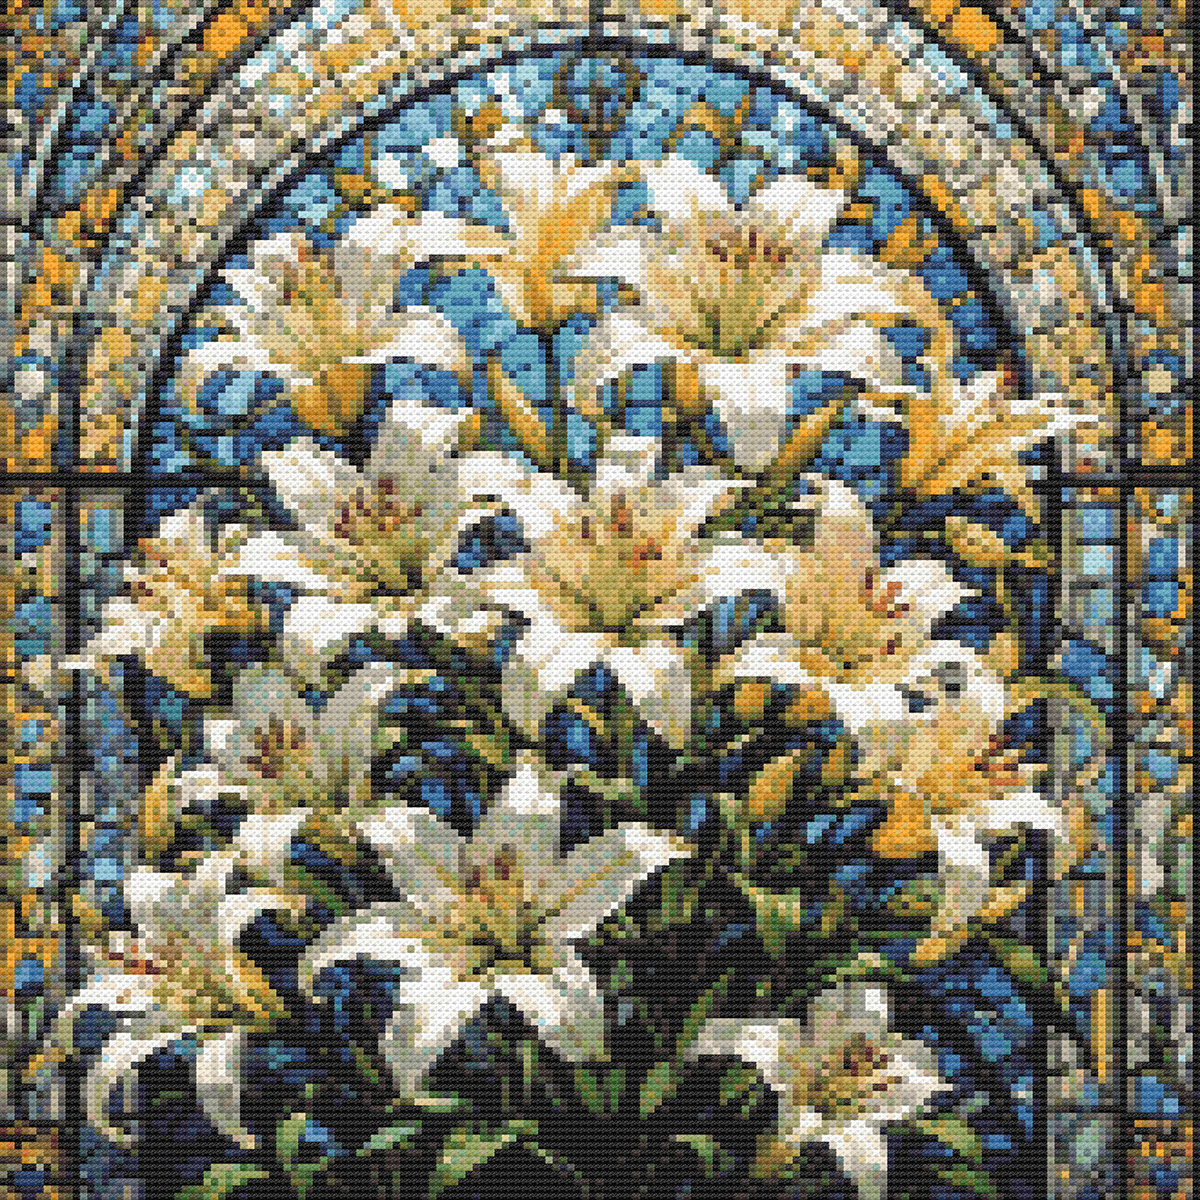 Lilies and Stained Glass rendition image